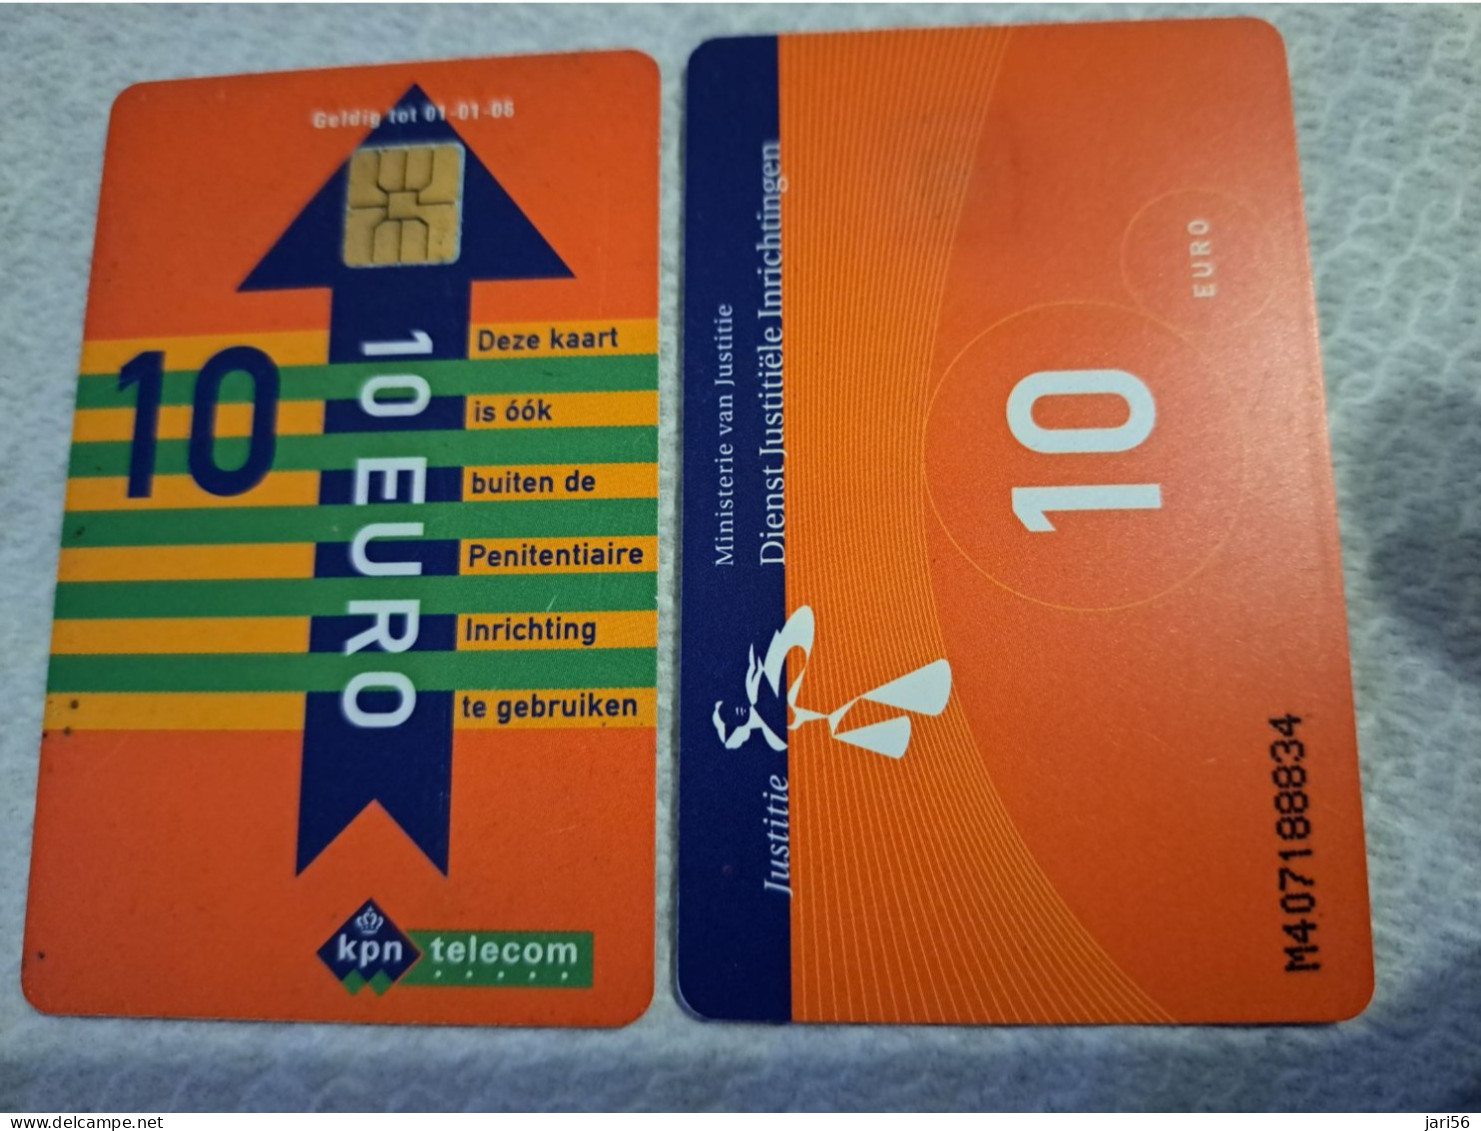 NETHERLANDS   € 10,-   / USED  / DATE  01-01-08  JUSTITIE/PRISON CARD  CHIP CARD/ USED   ** 16161** - Schede GSM, Prepagate E Ricariche